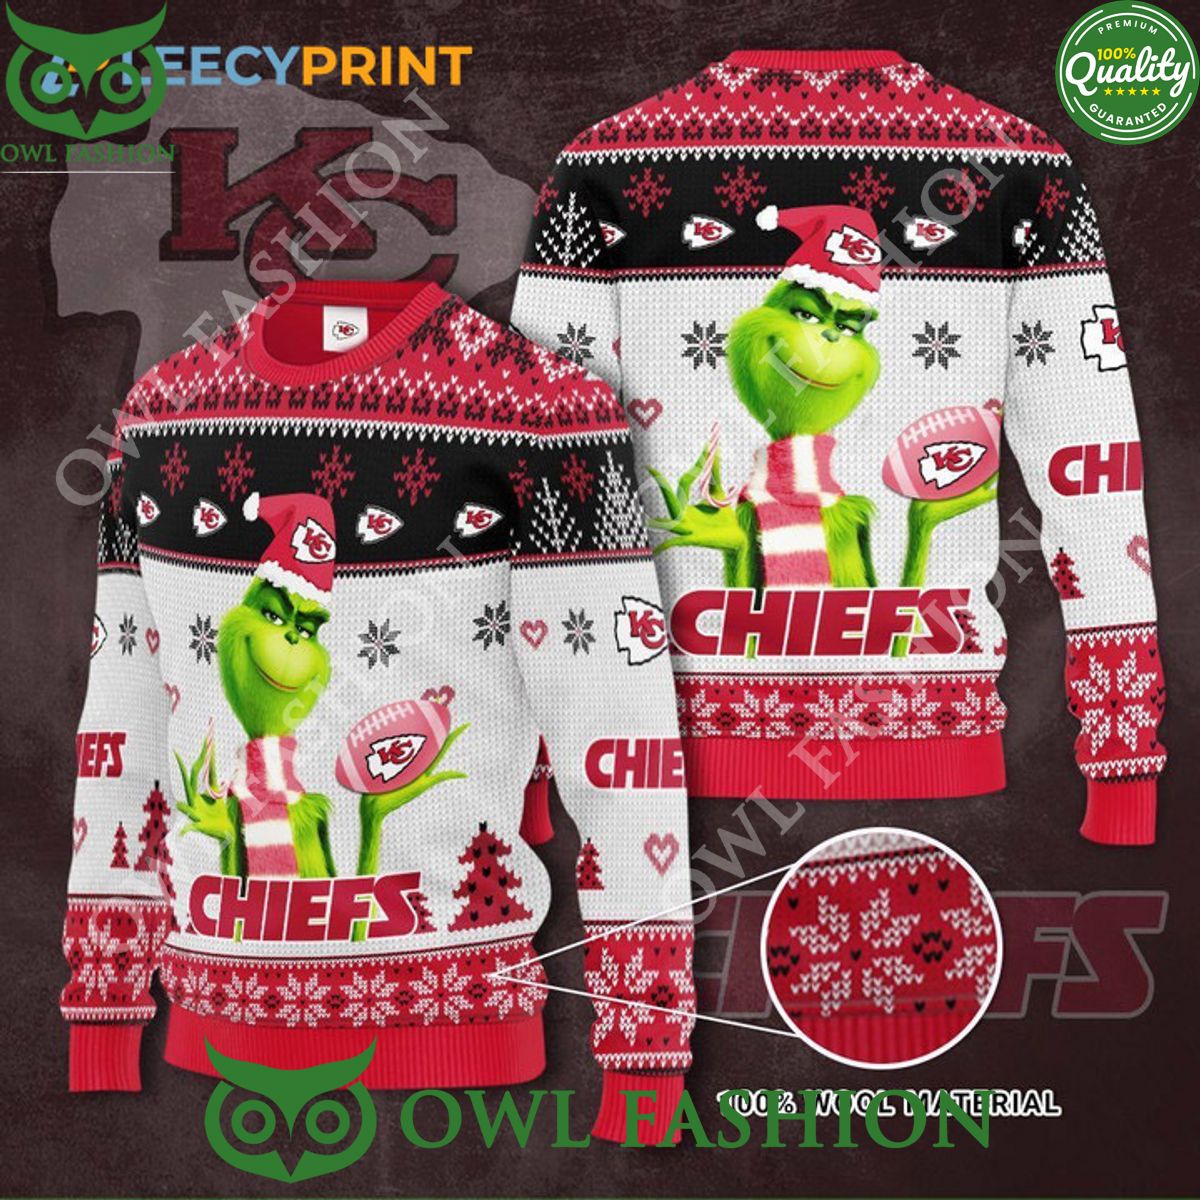 grinch stole christmas kansas city chiefs the gift for fan ugly sweater jumper christmas 1 eGybU.jpg